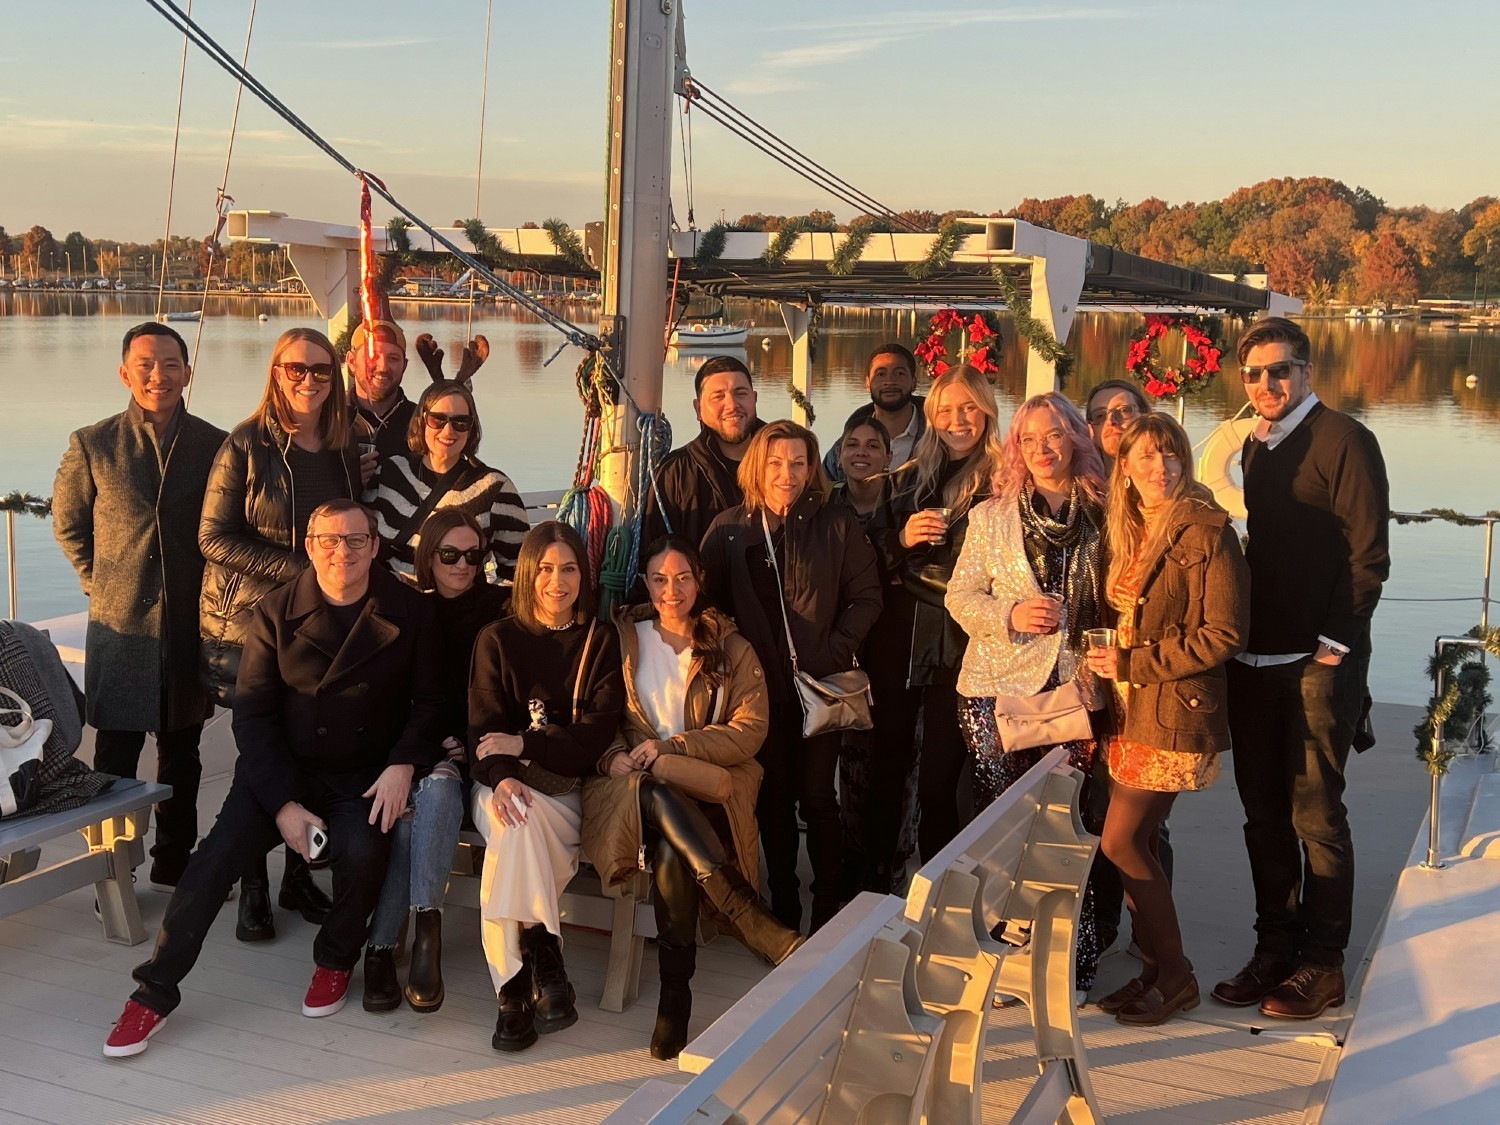 During our Holiday party, the Dallas team went on a sailboat at sunset.